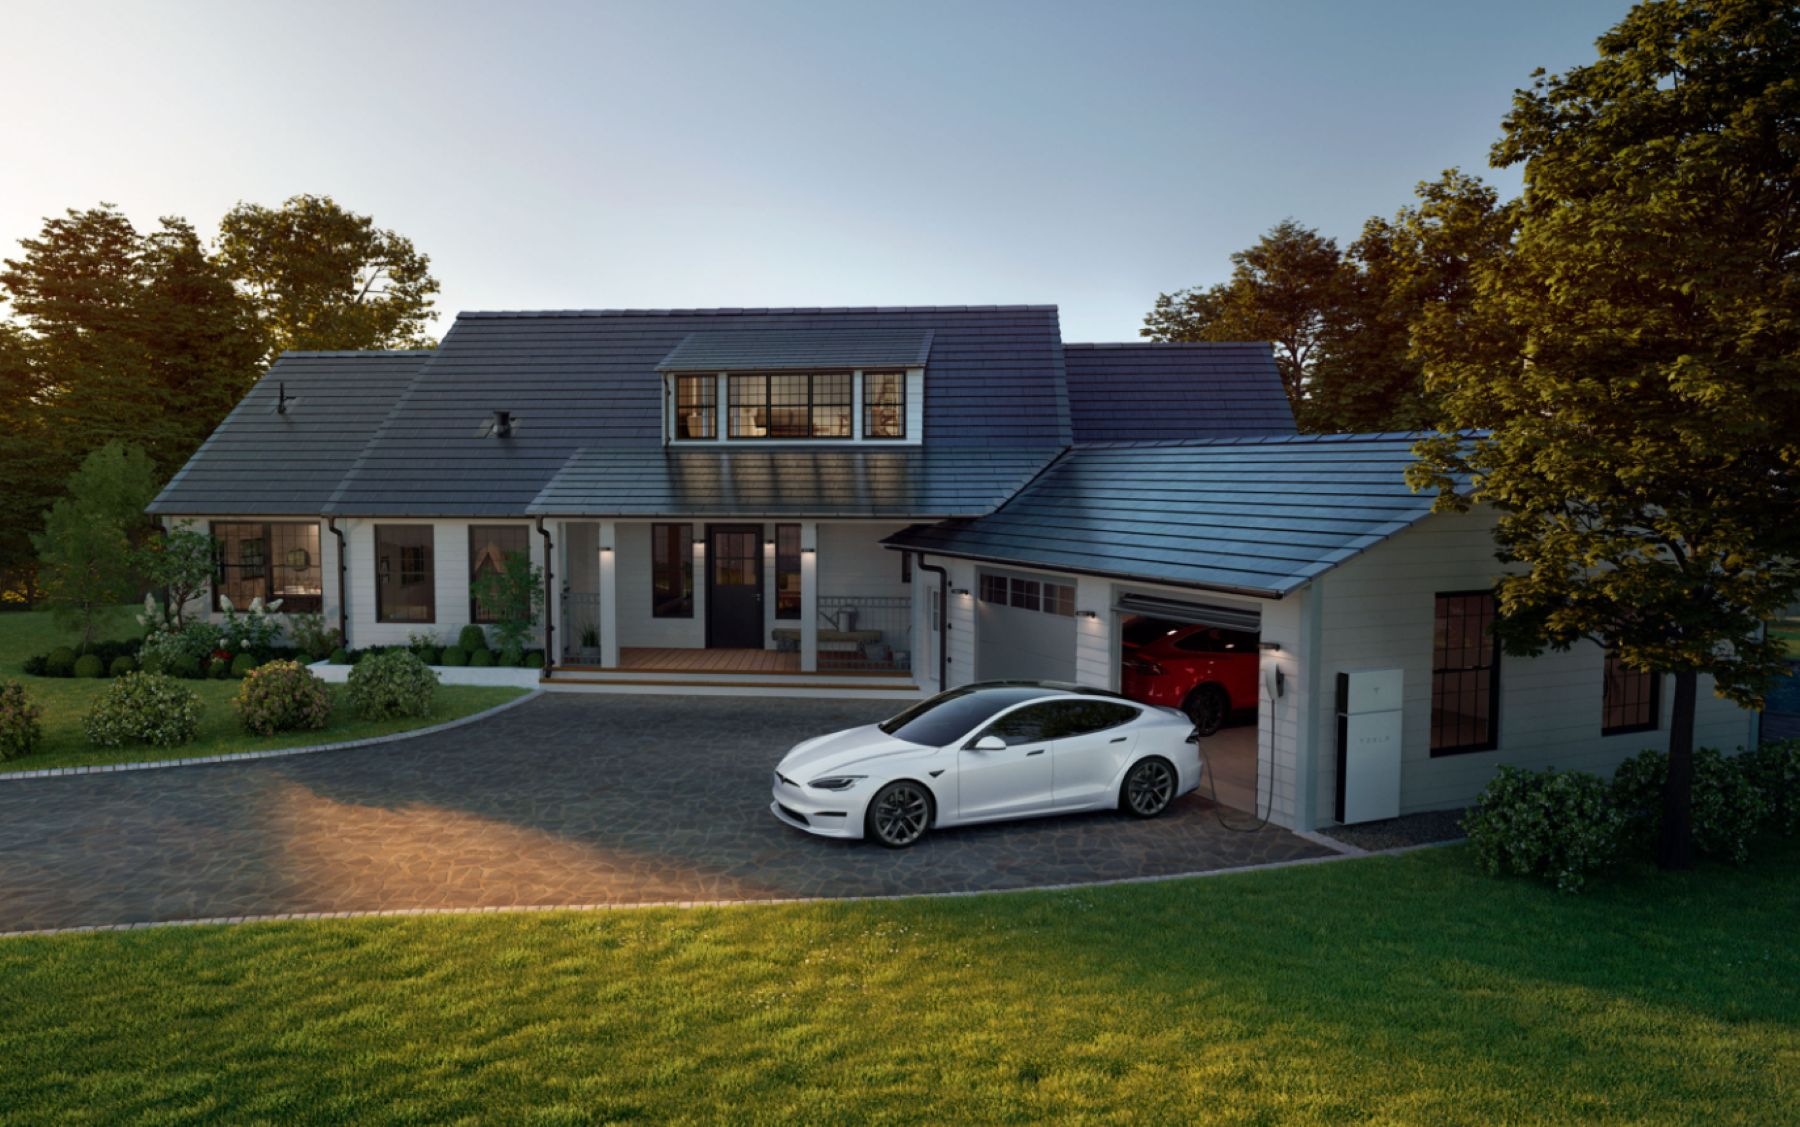 Tesla Model S plugged into a Tesla wall charger at home outside of a garage